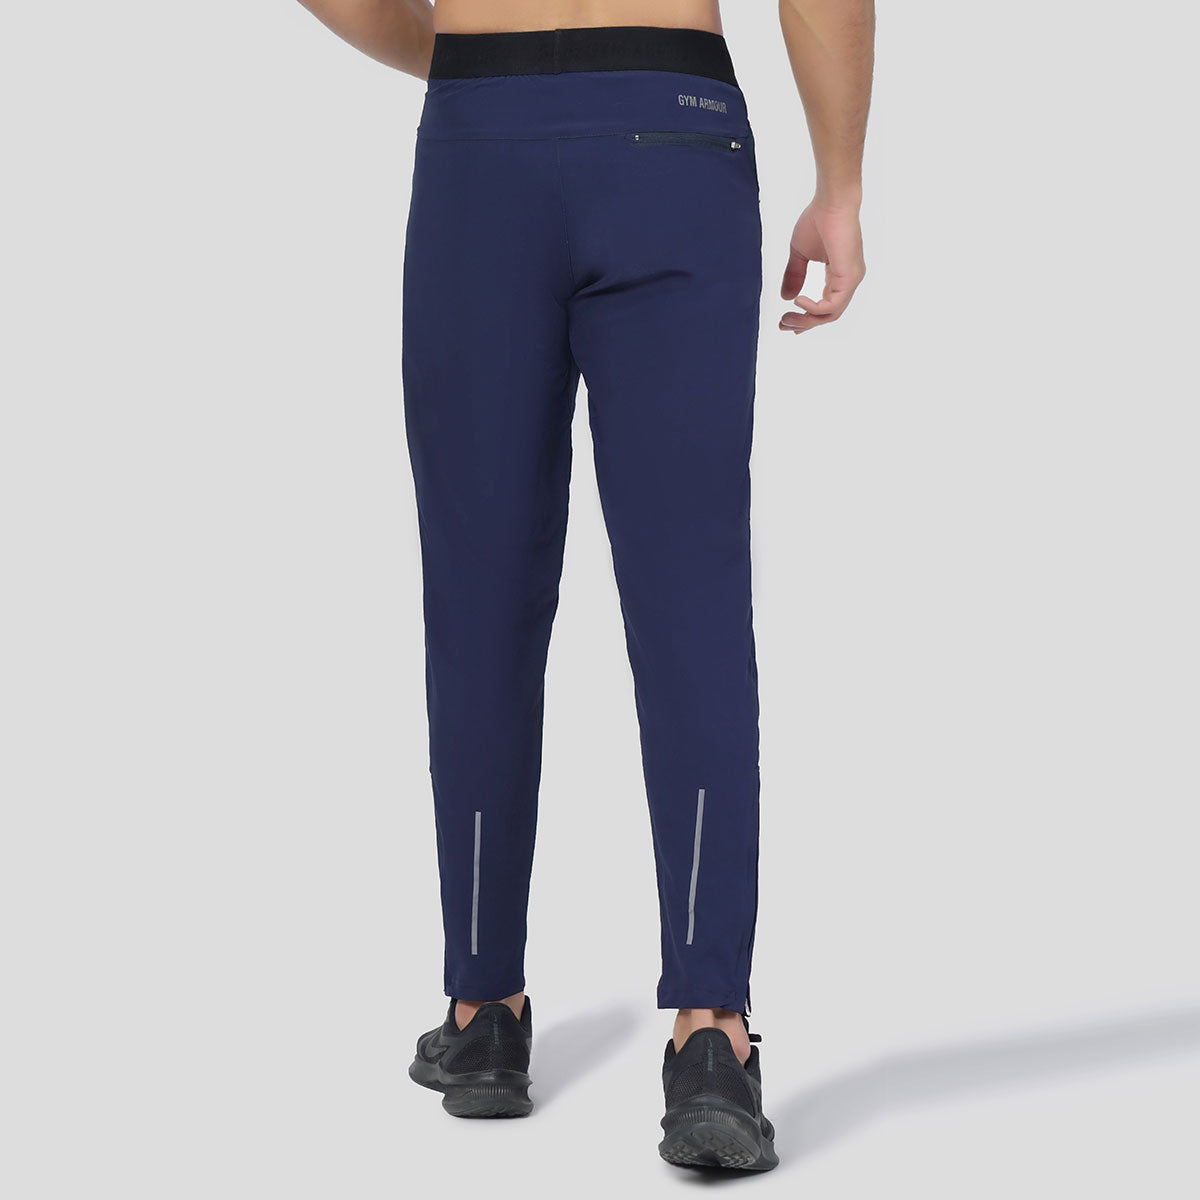 Epic Stretched Bottoms (Saphire Blue)